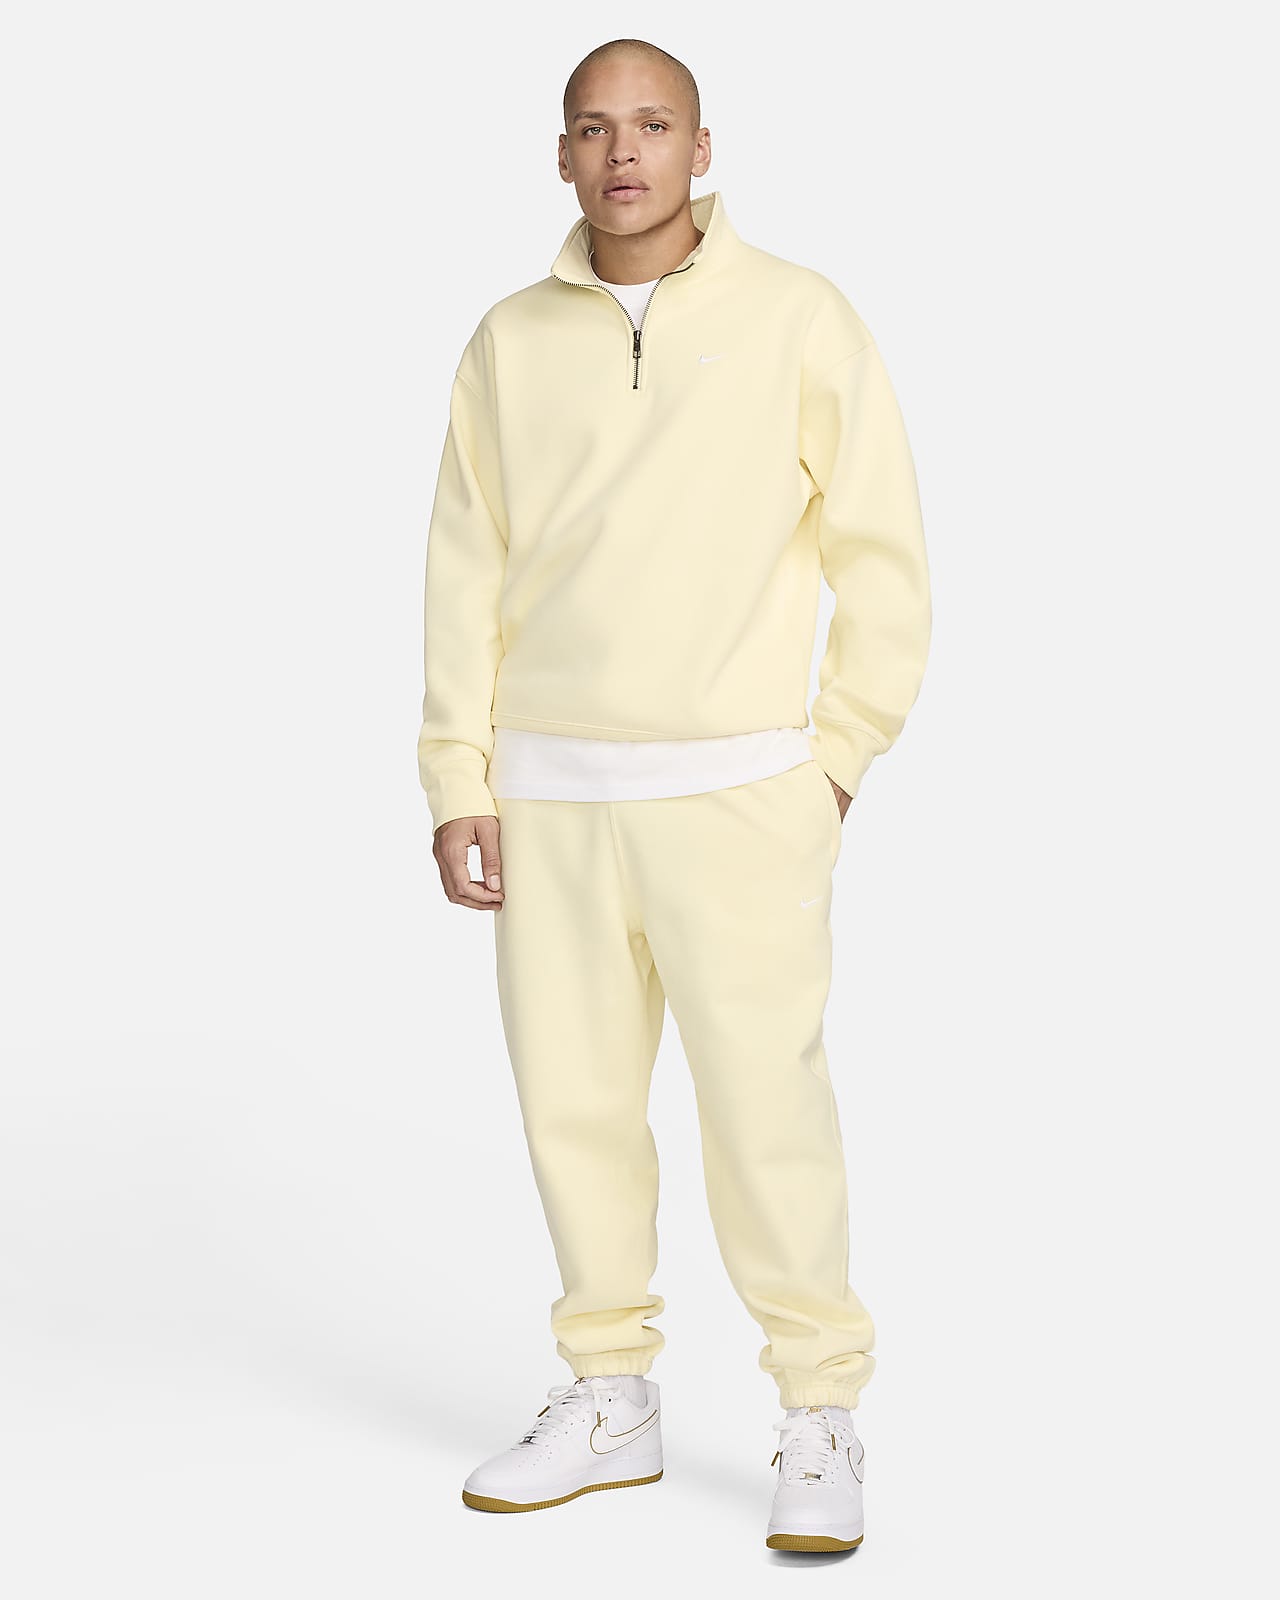 White Solo Swoosh Lounge Pants by Nike on Sale